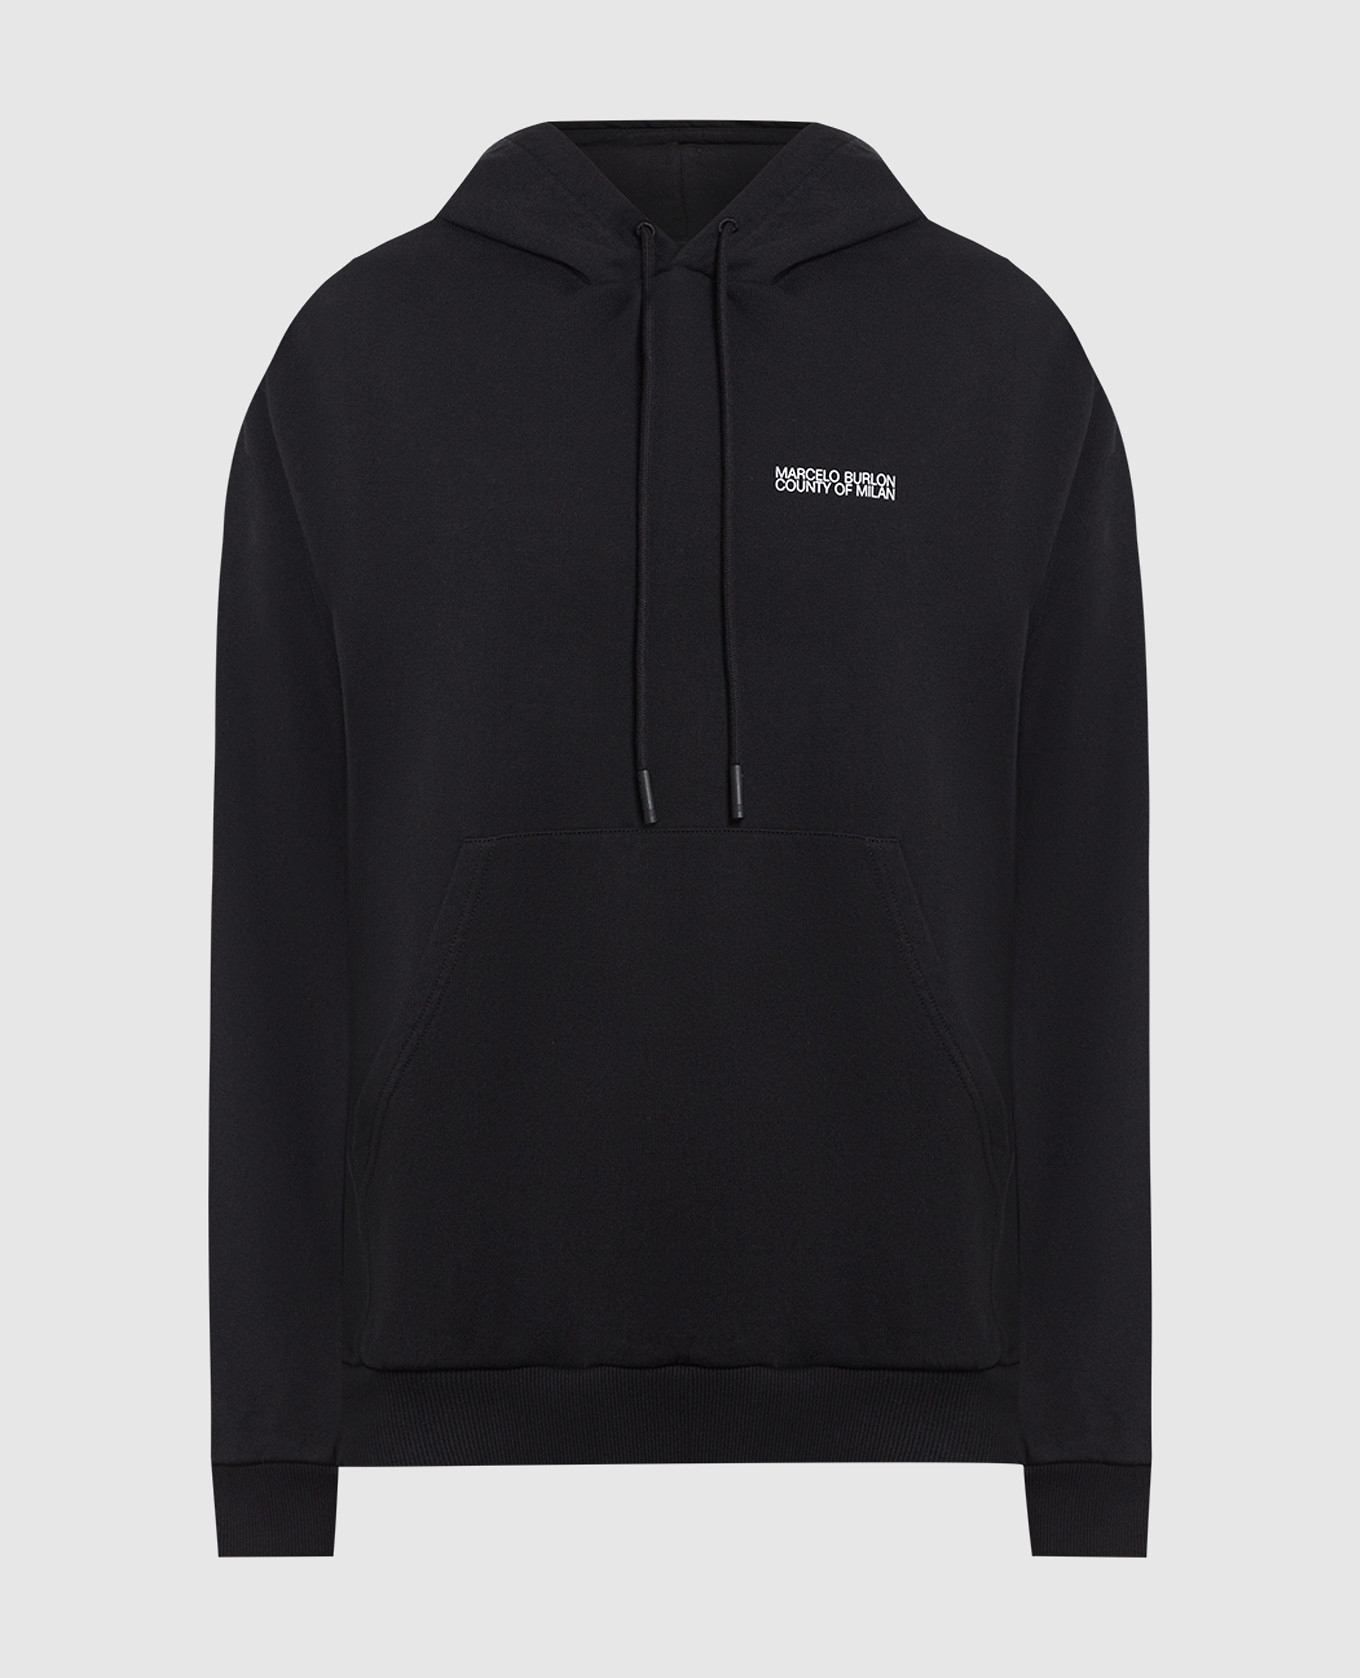 Black TEMPERA OVER CROSS hoodie with contrasting logo